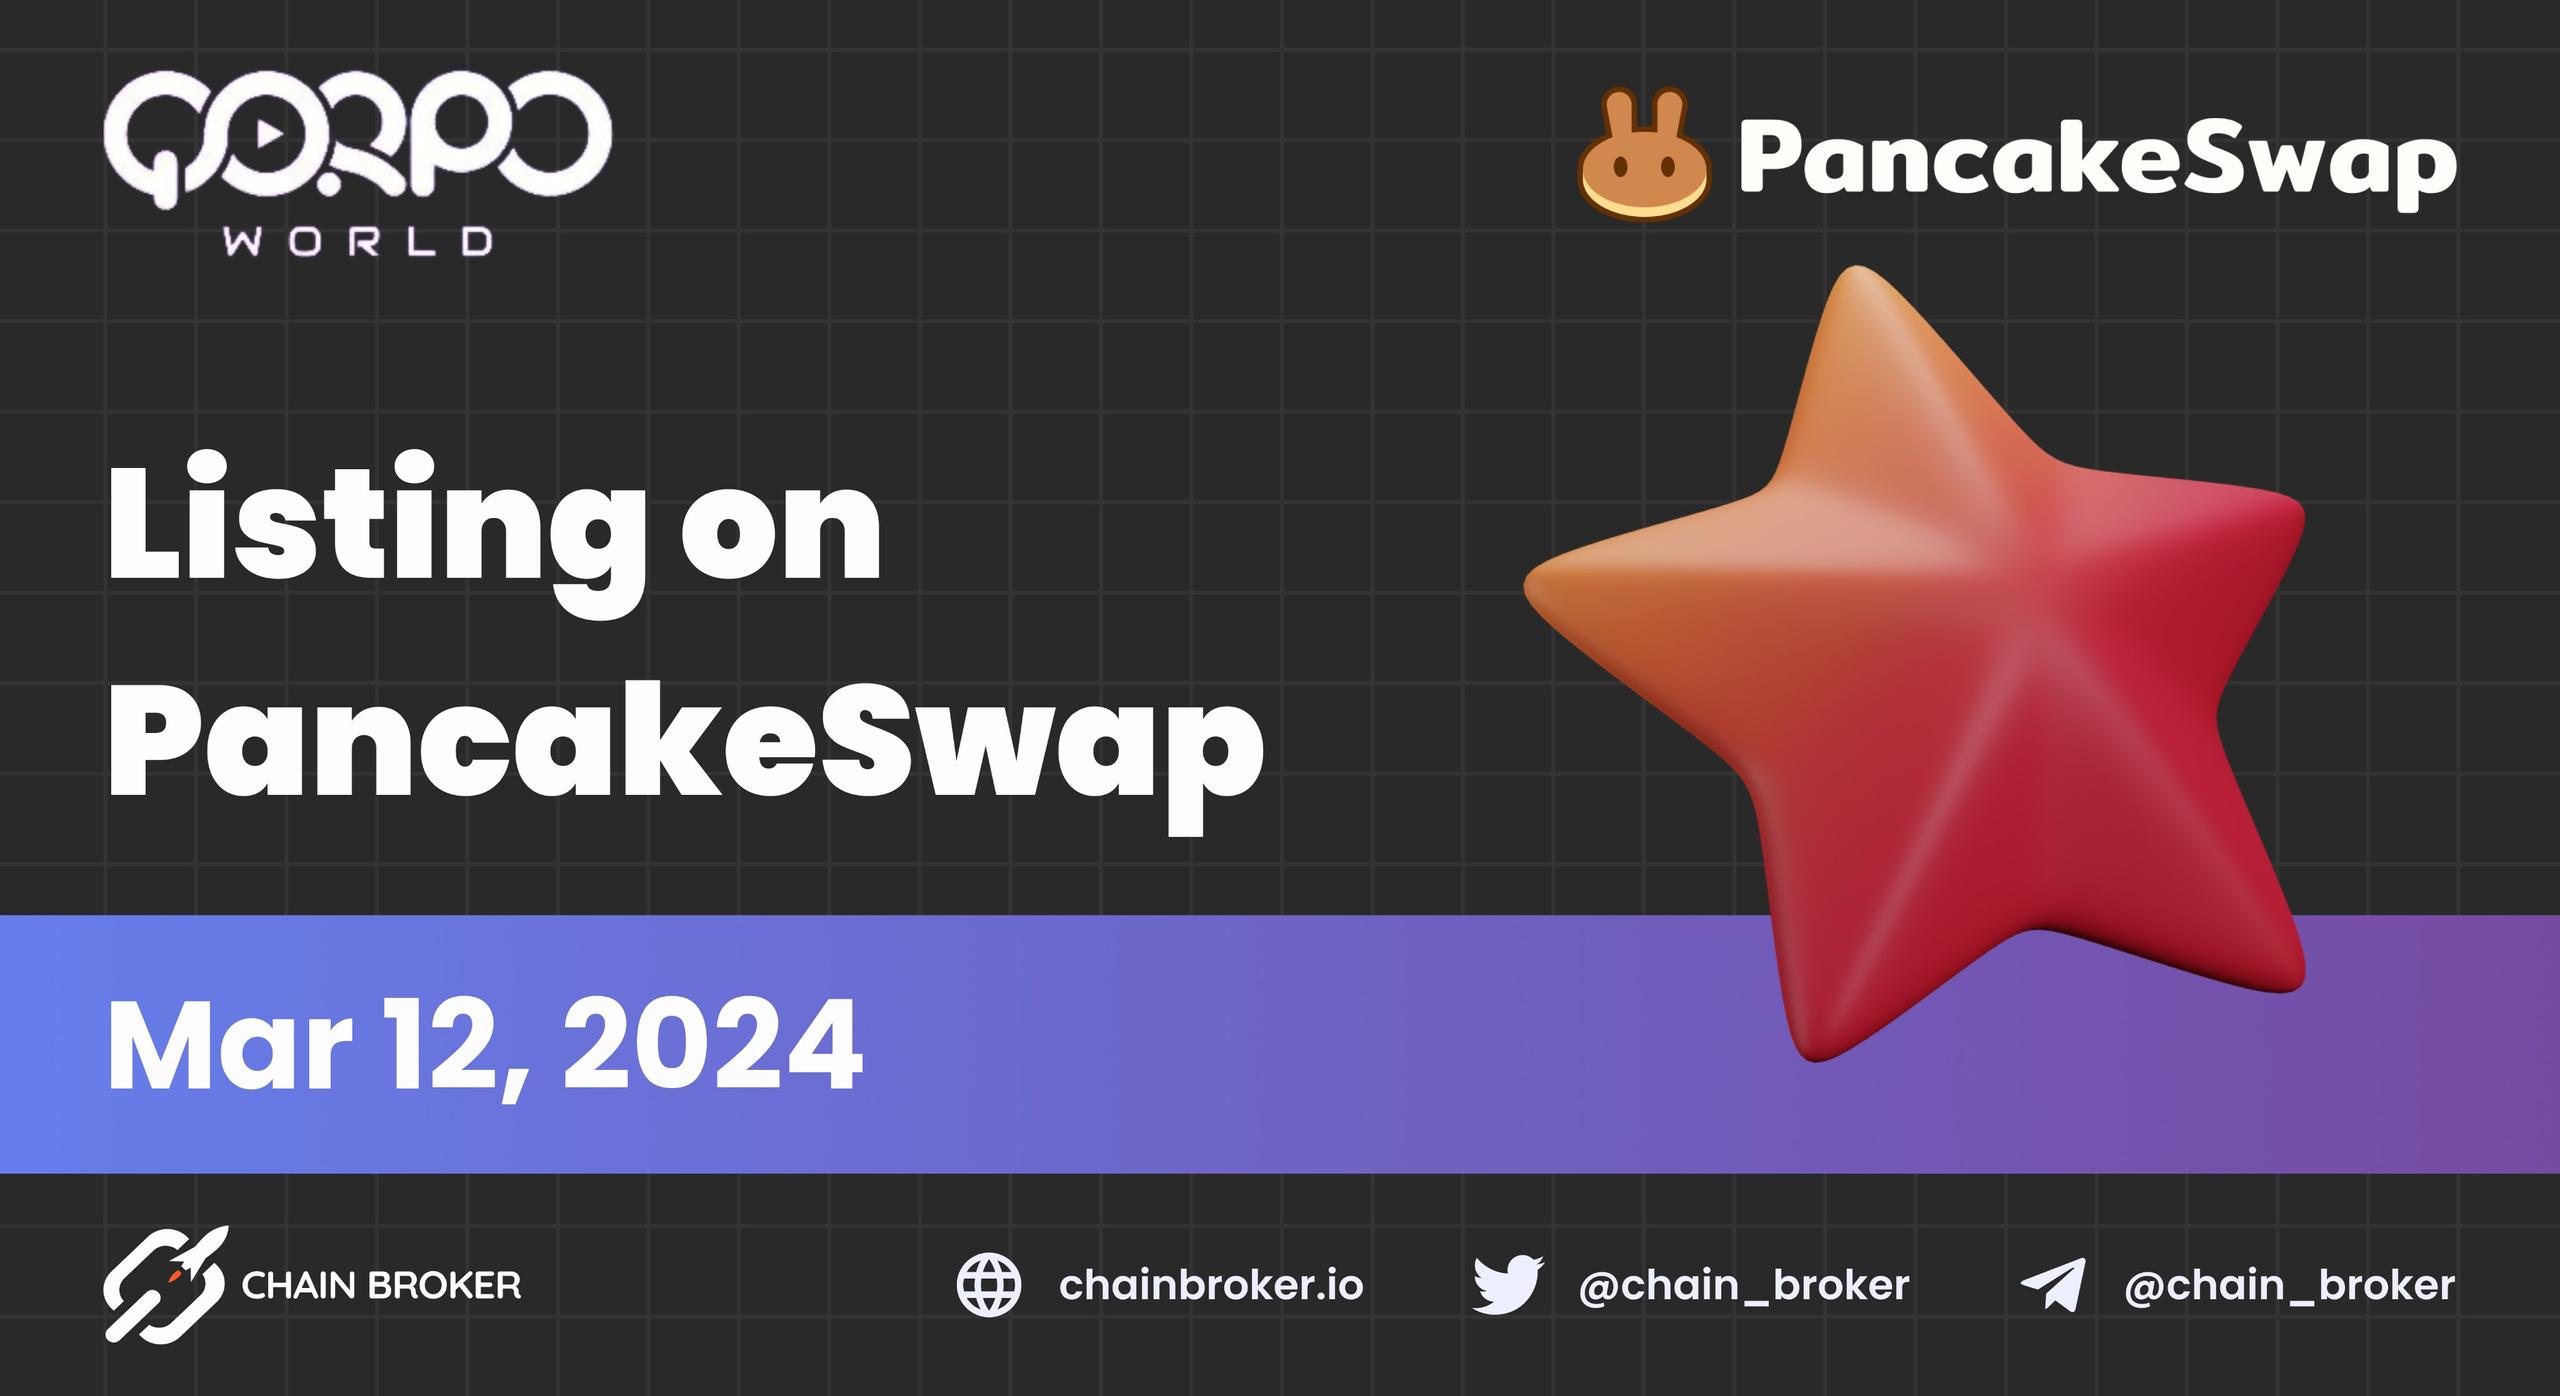 QORPO WORLD has been Listed on PancakeSwap